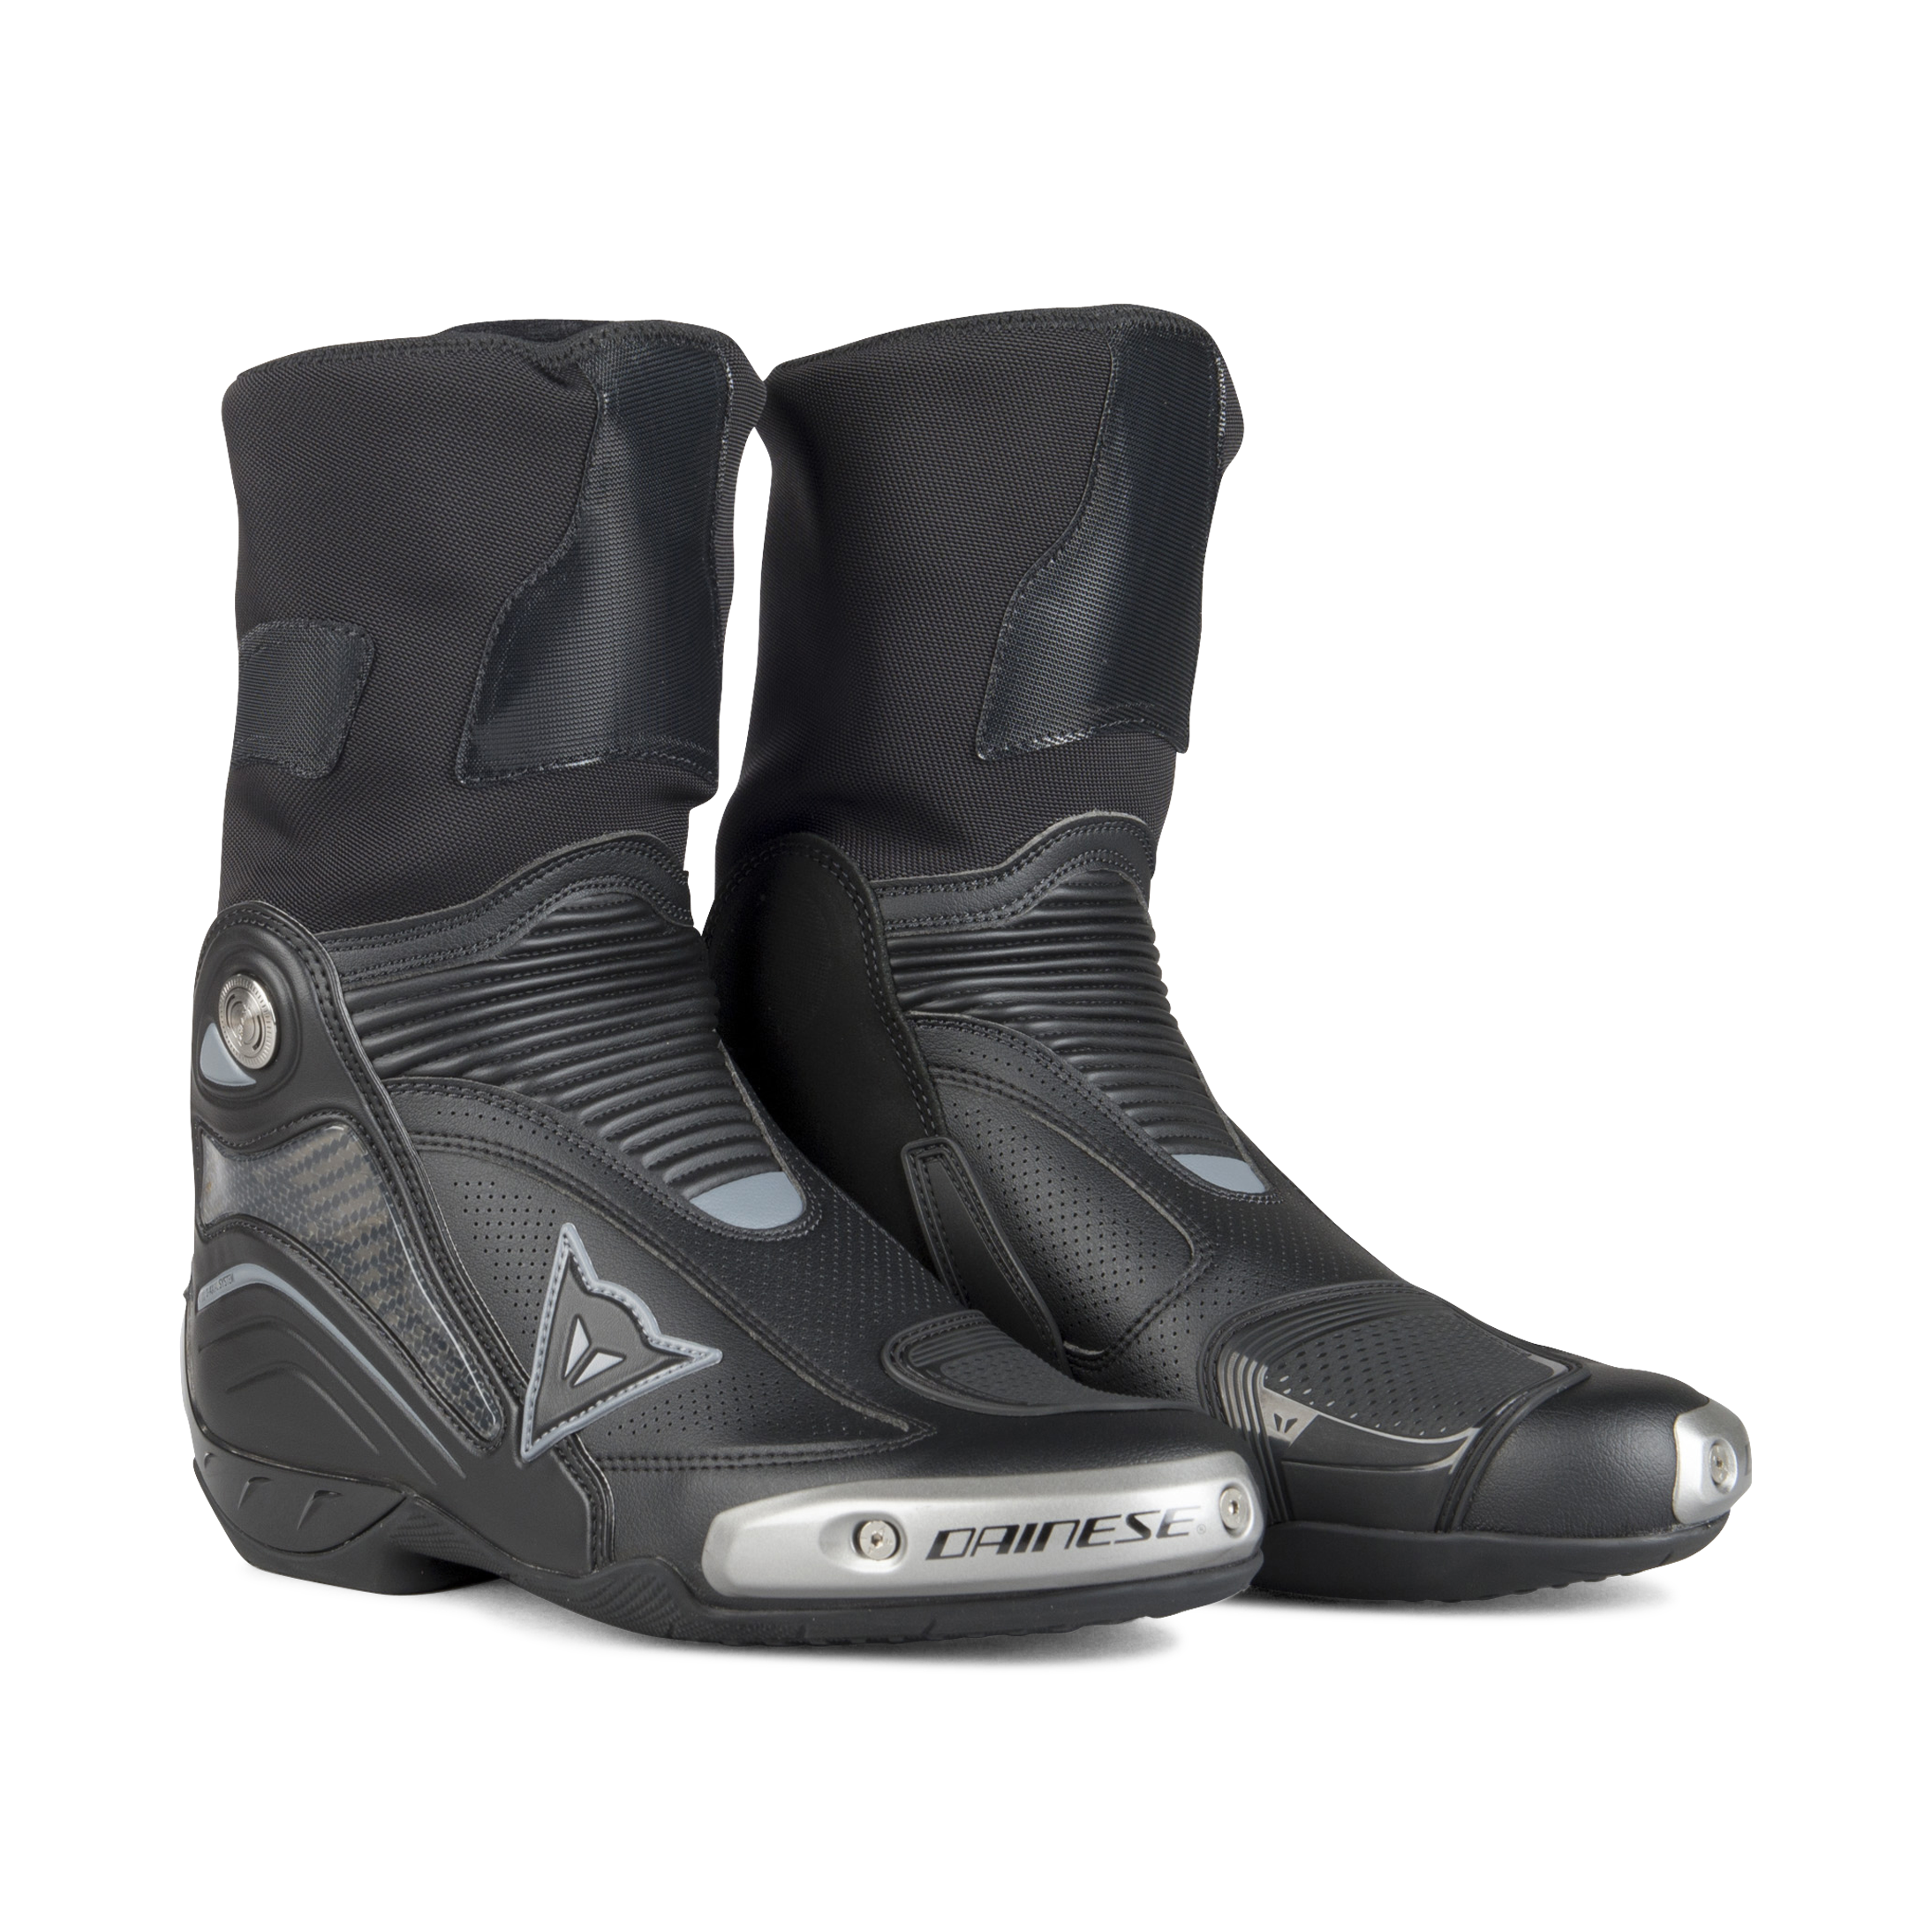 dainese axial d1 boots